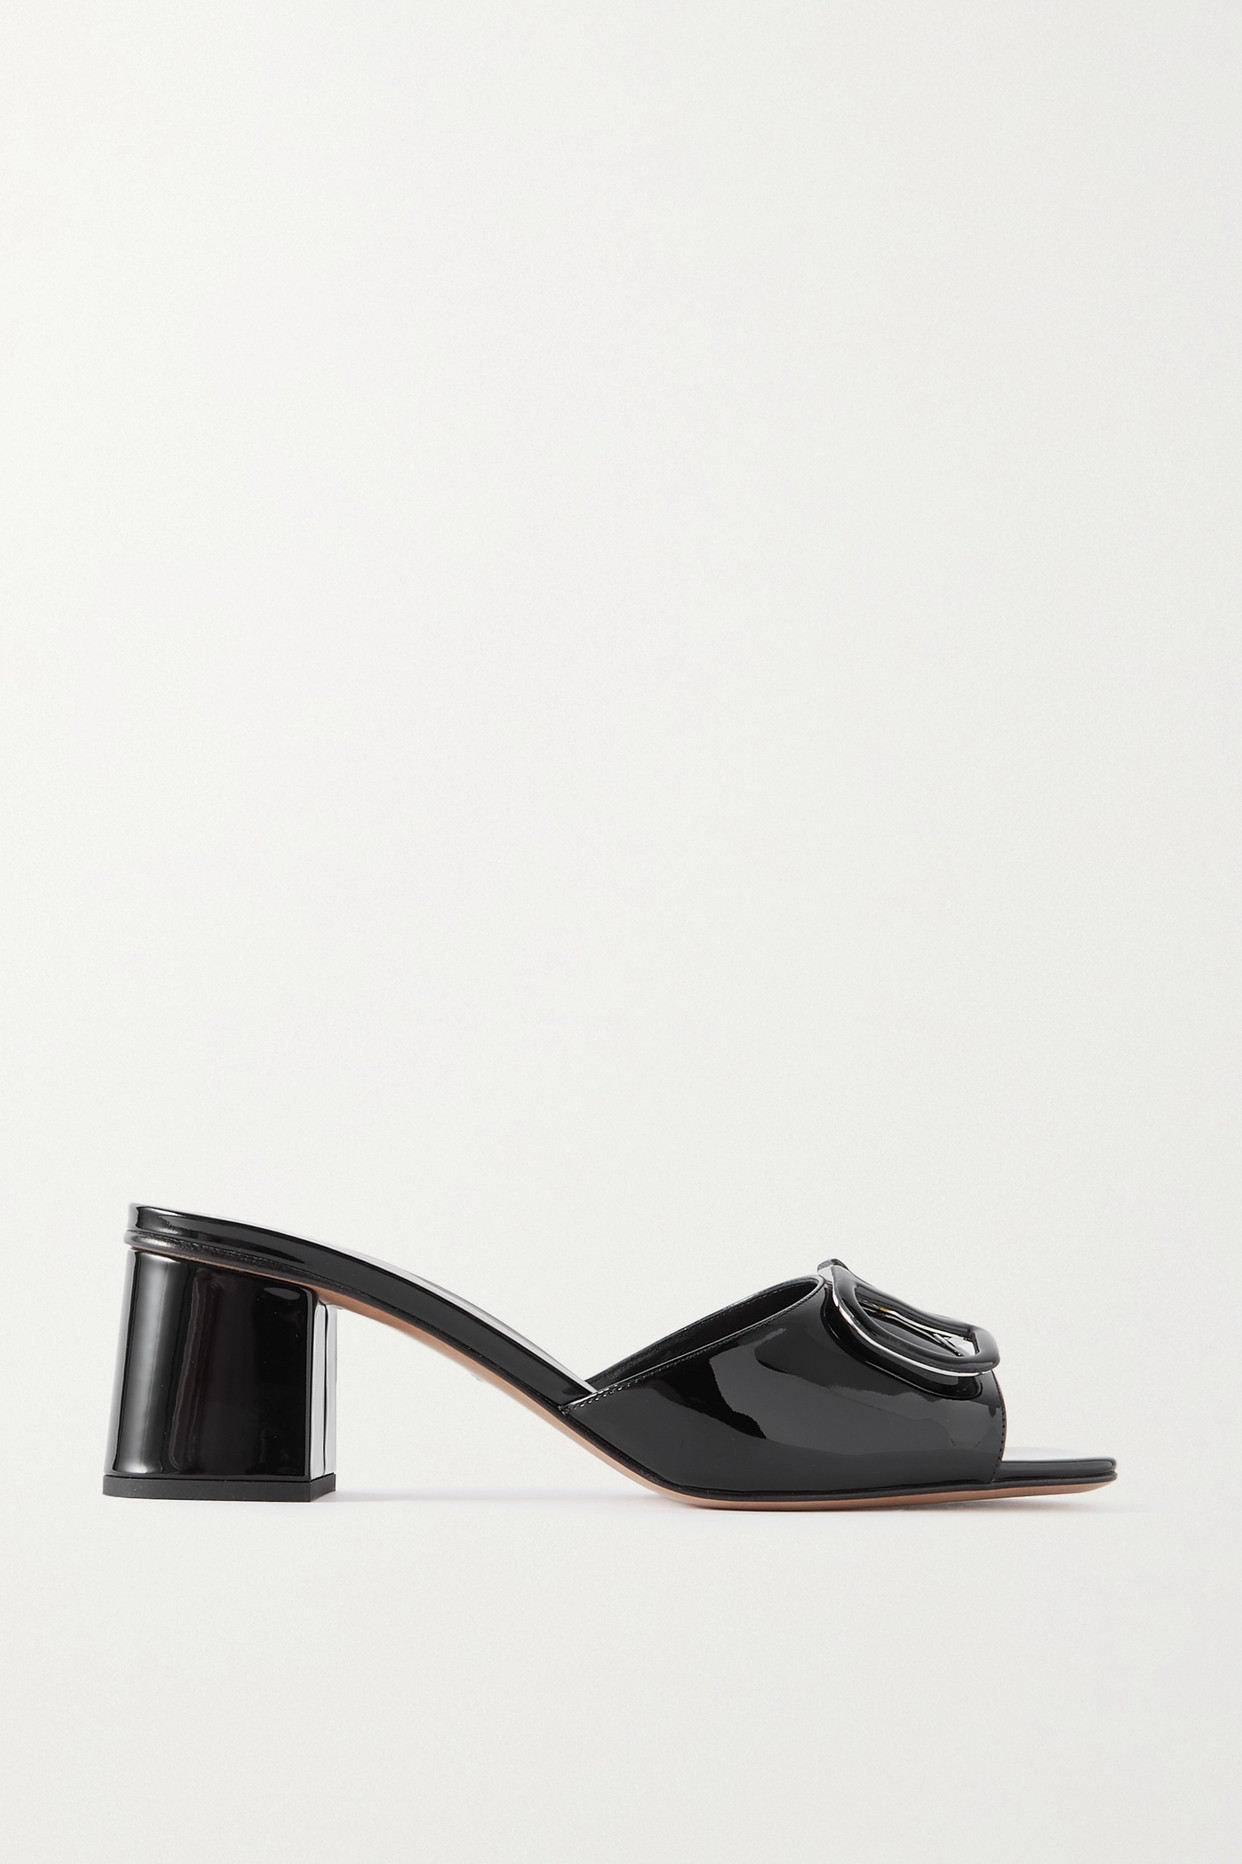 Embellished Patent-Leather Mules in black